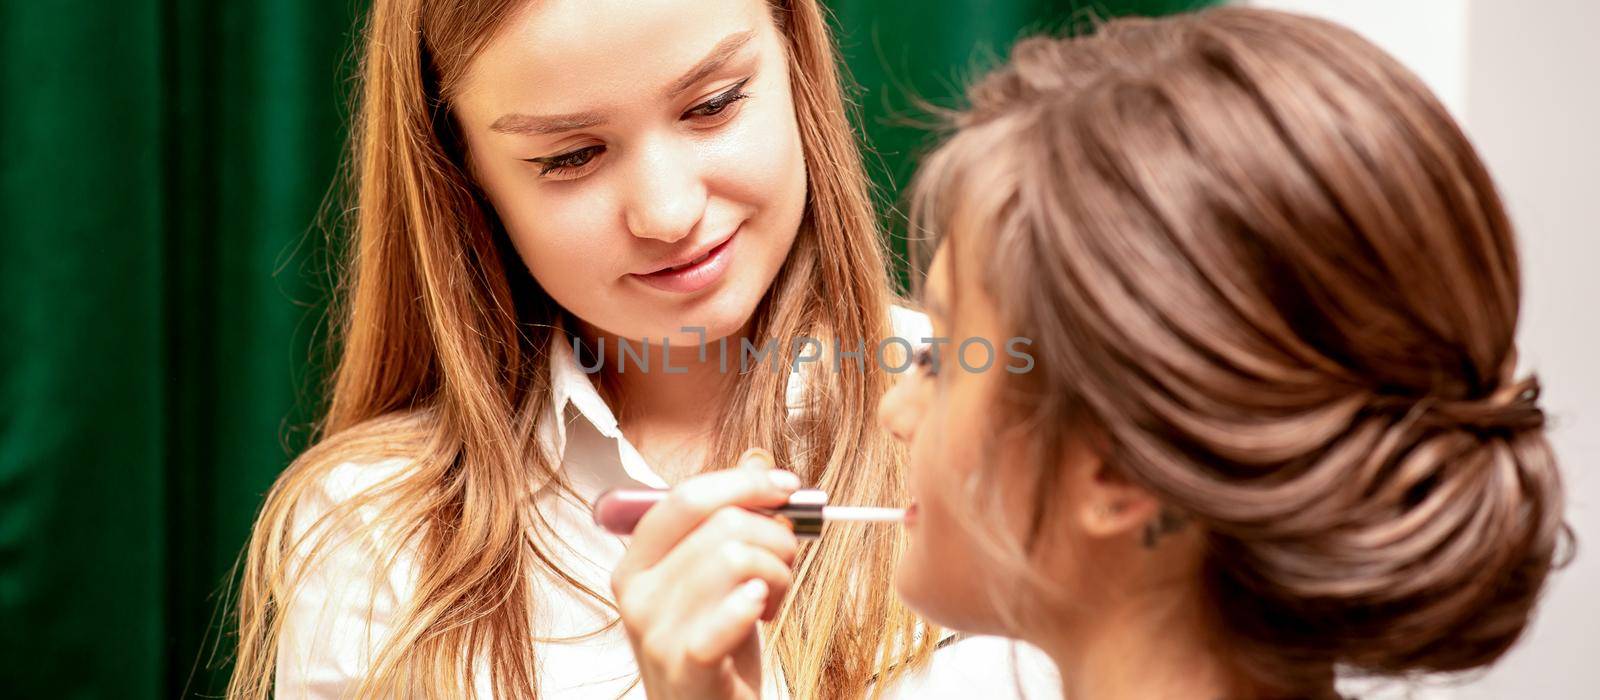 Makeup in the process. The makeup artist applies pink gloss lipstick on the lips of the beautiful face of the young caucasian woman in a beauty salon